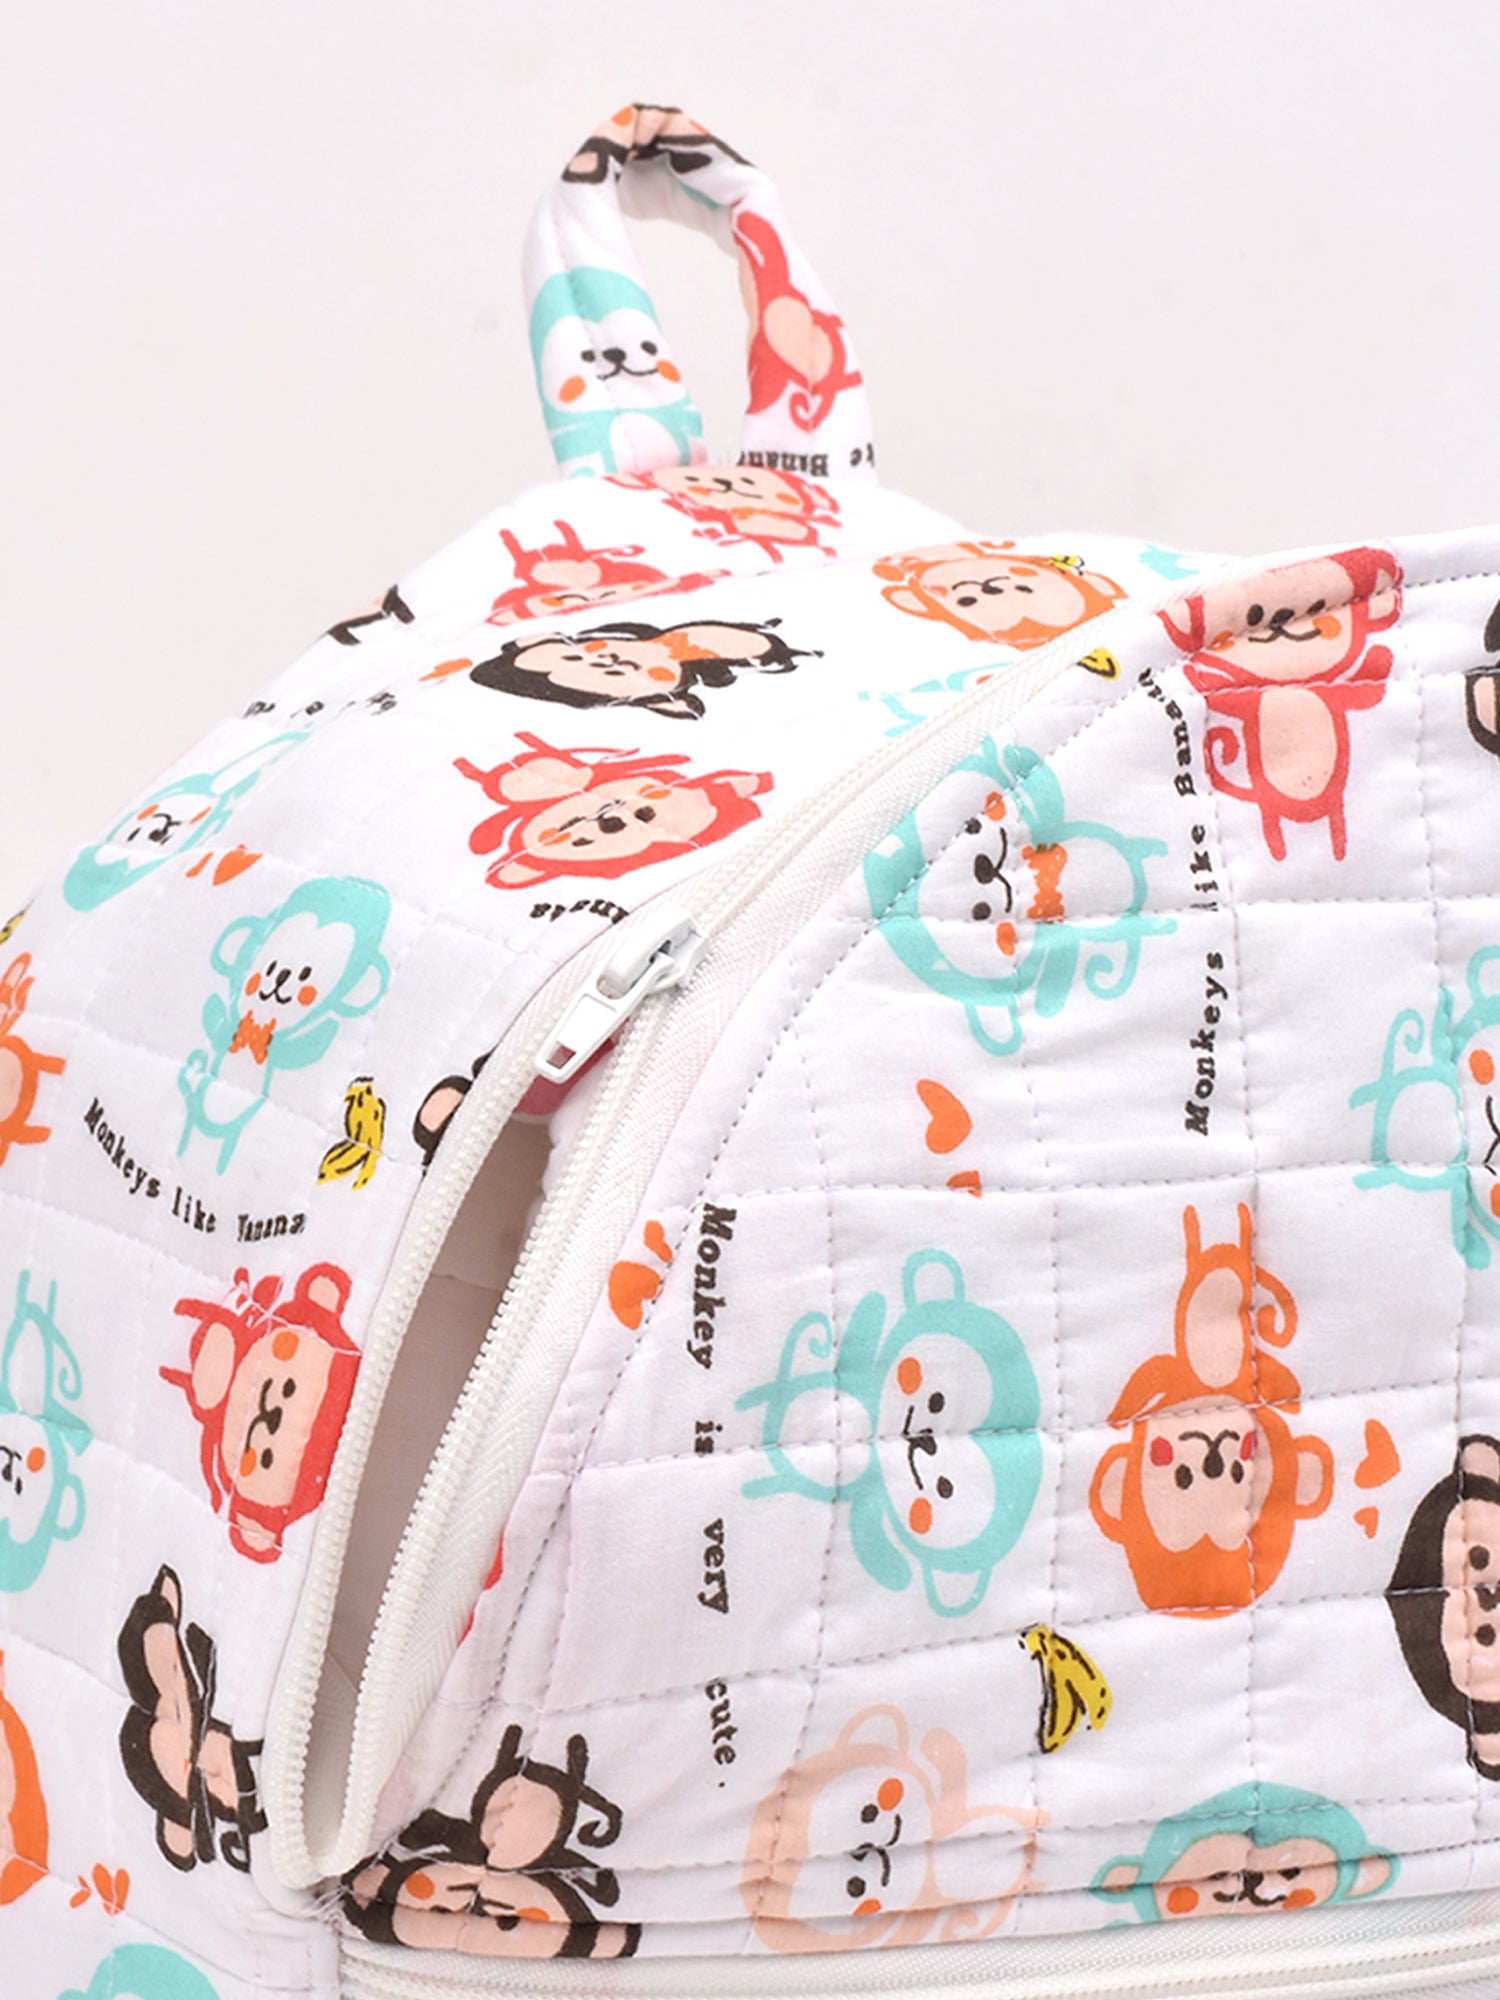 Baby Organic Cotton Muslin Travel Bag- Diaper Multipurpose Carry bags for Mothers- Monkey